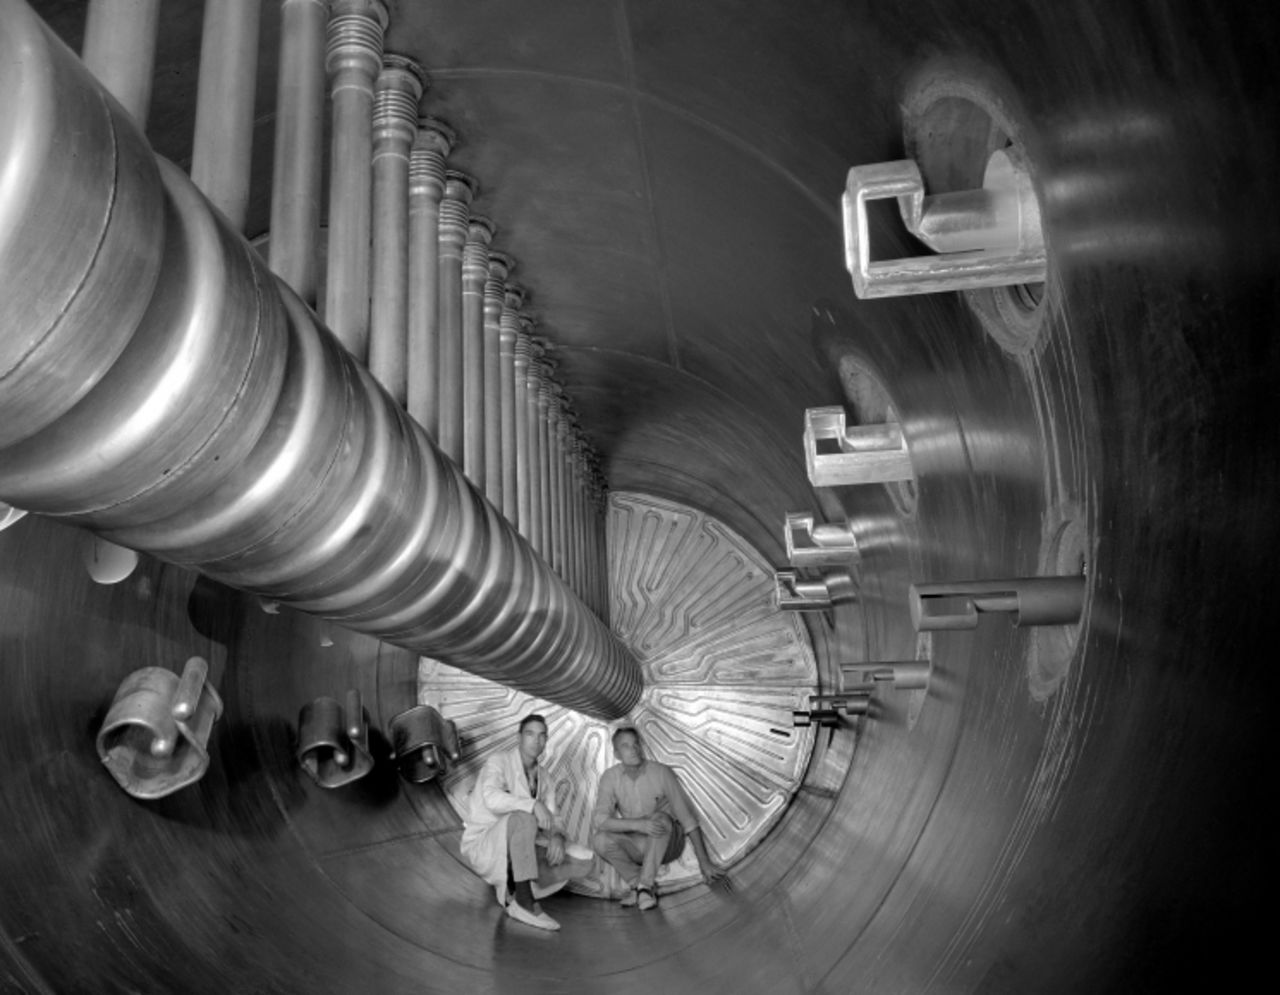 Two scientists show the scale of an earlier accelerator at the U.S. Department of Energy's Lawrence Berkeley National Laboratory. The Super HILAC (Super Heavy Ion Linear Accelerator) was one of the first accelerators that could accelerate the ions of all known natural elements to energies where they could be smashed apart. The lab is aptly named after Ernest Lawrence who invented the first circular accelerator at the University of California, Berkeley, back in 1929.